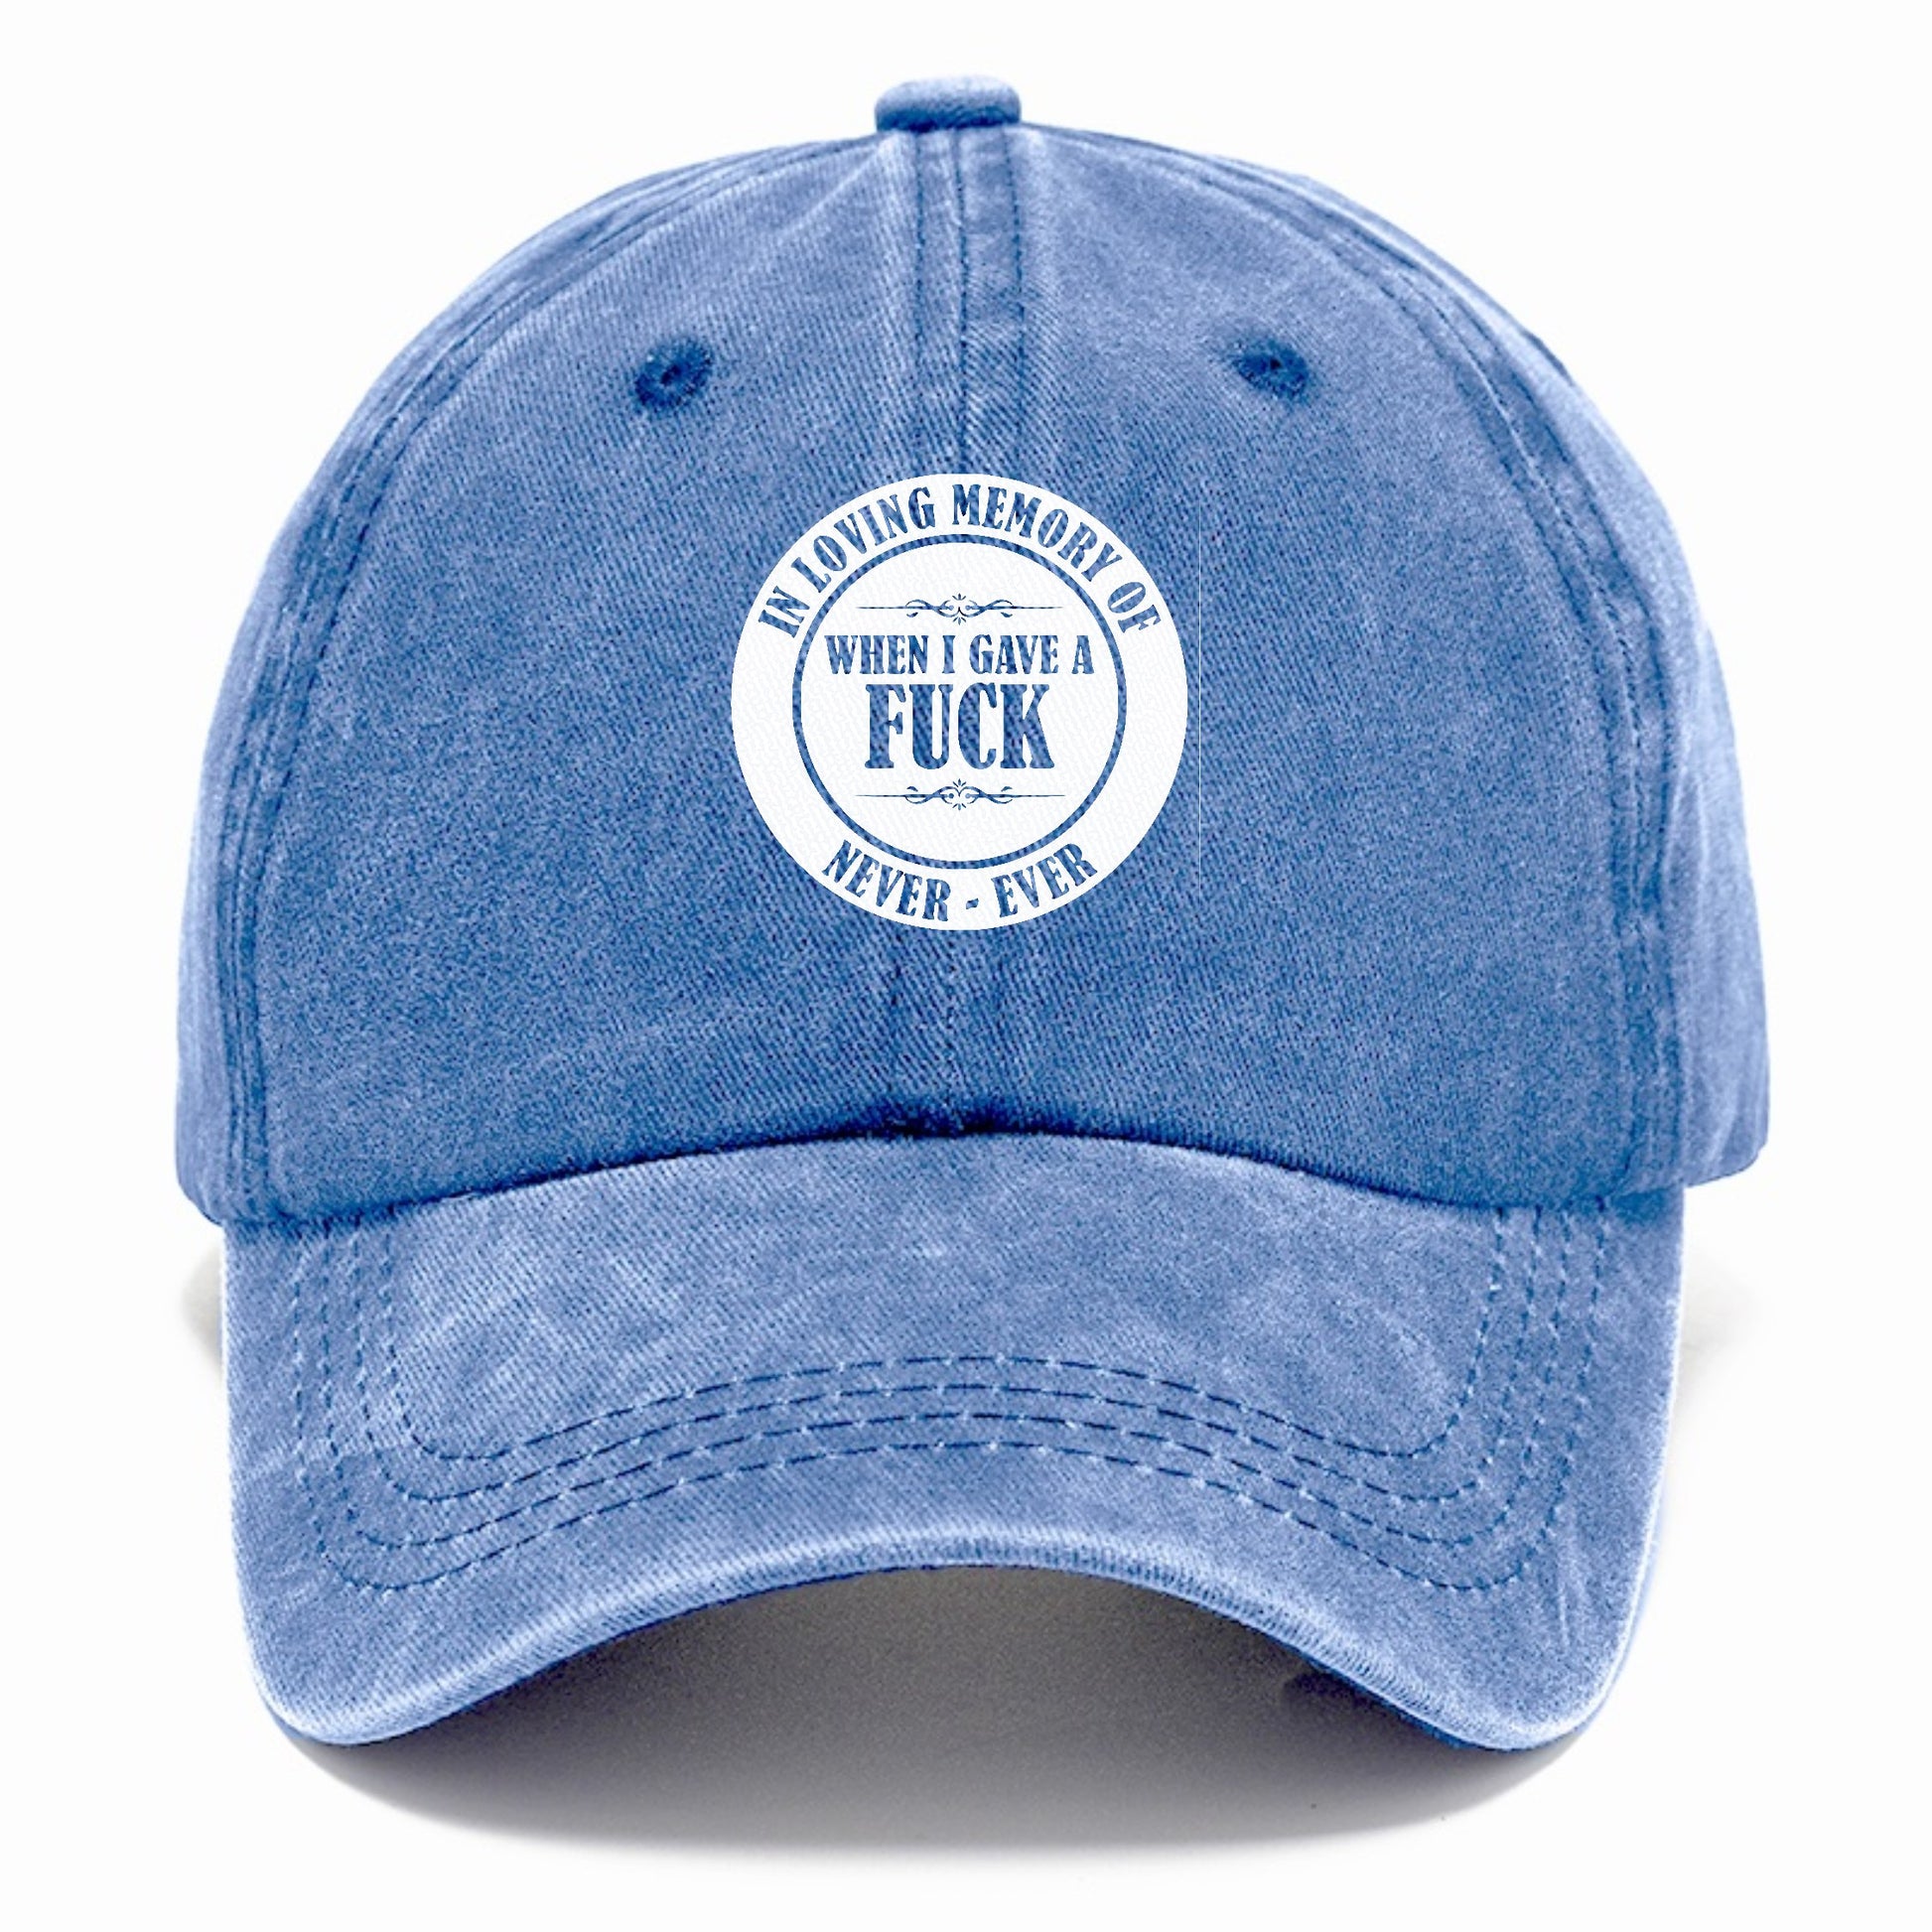 In loving memory of never ever when l gave a fuck Hat